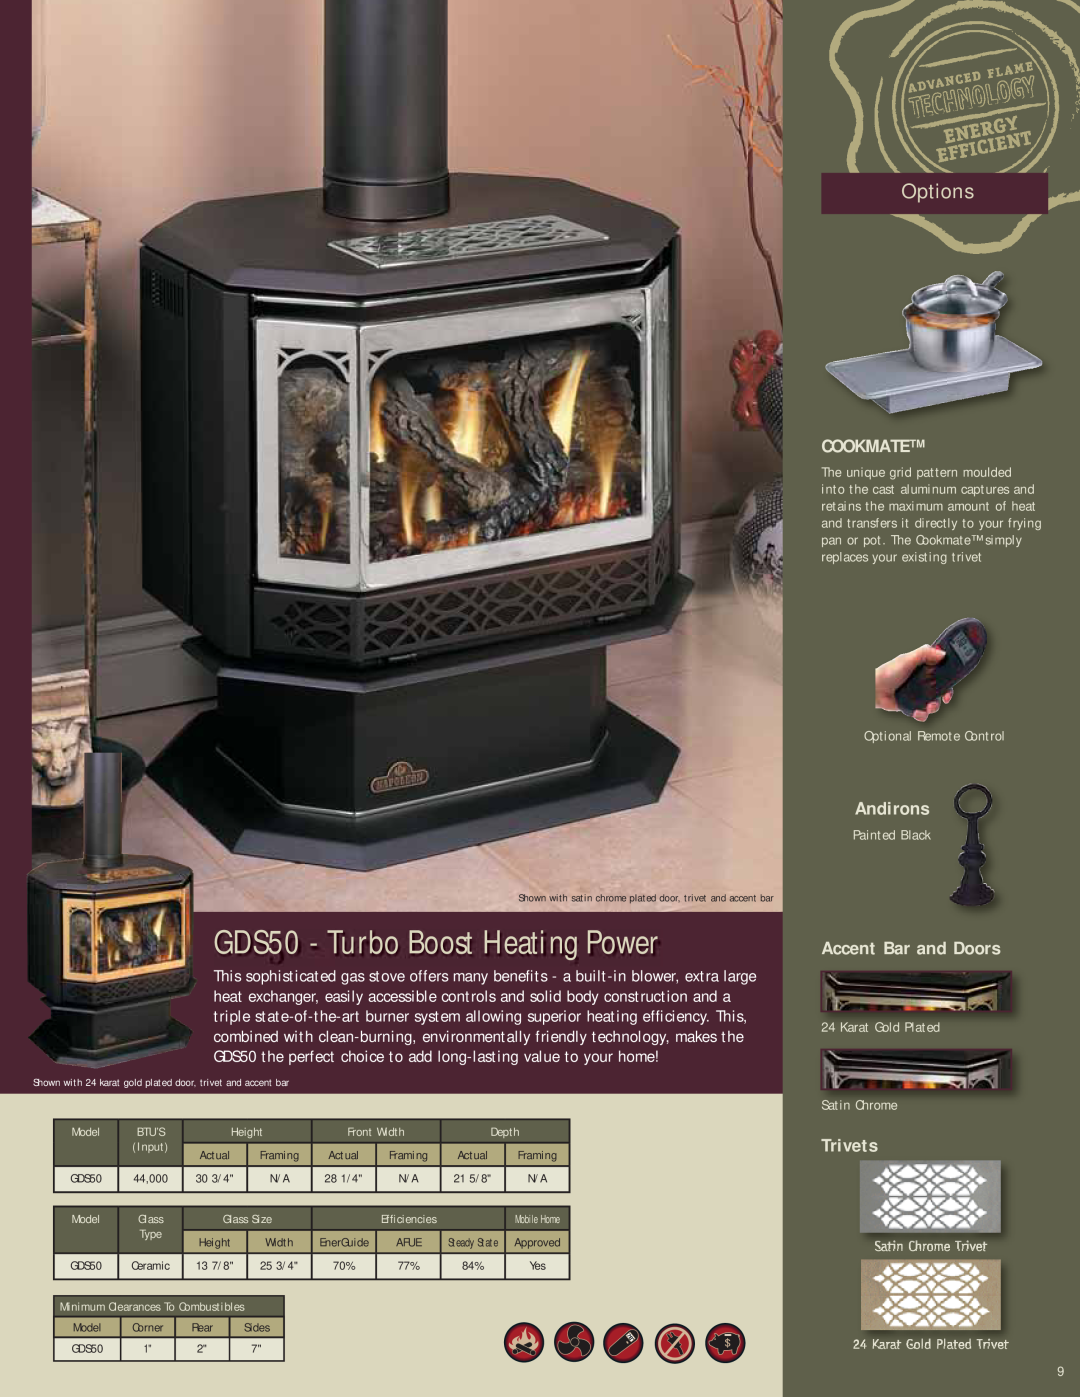 Napoleon Fireplaces Gas Burning Stoves manual GDS50 - Turbo Boost Heating Power, Options, Cookmate, Andirons, Trivets 